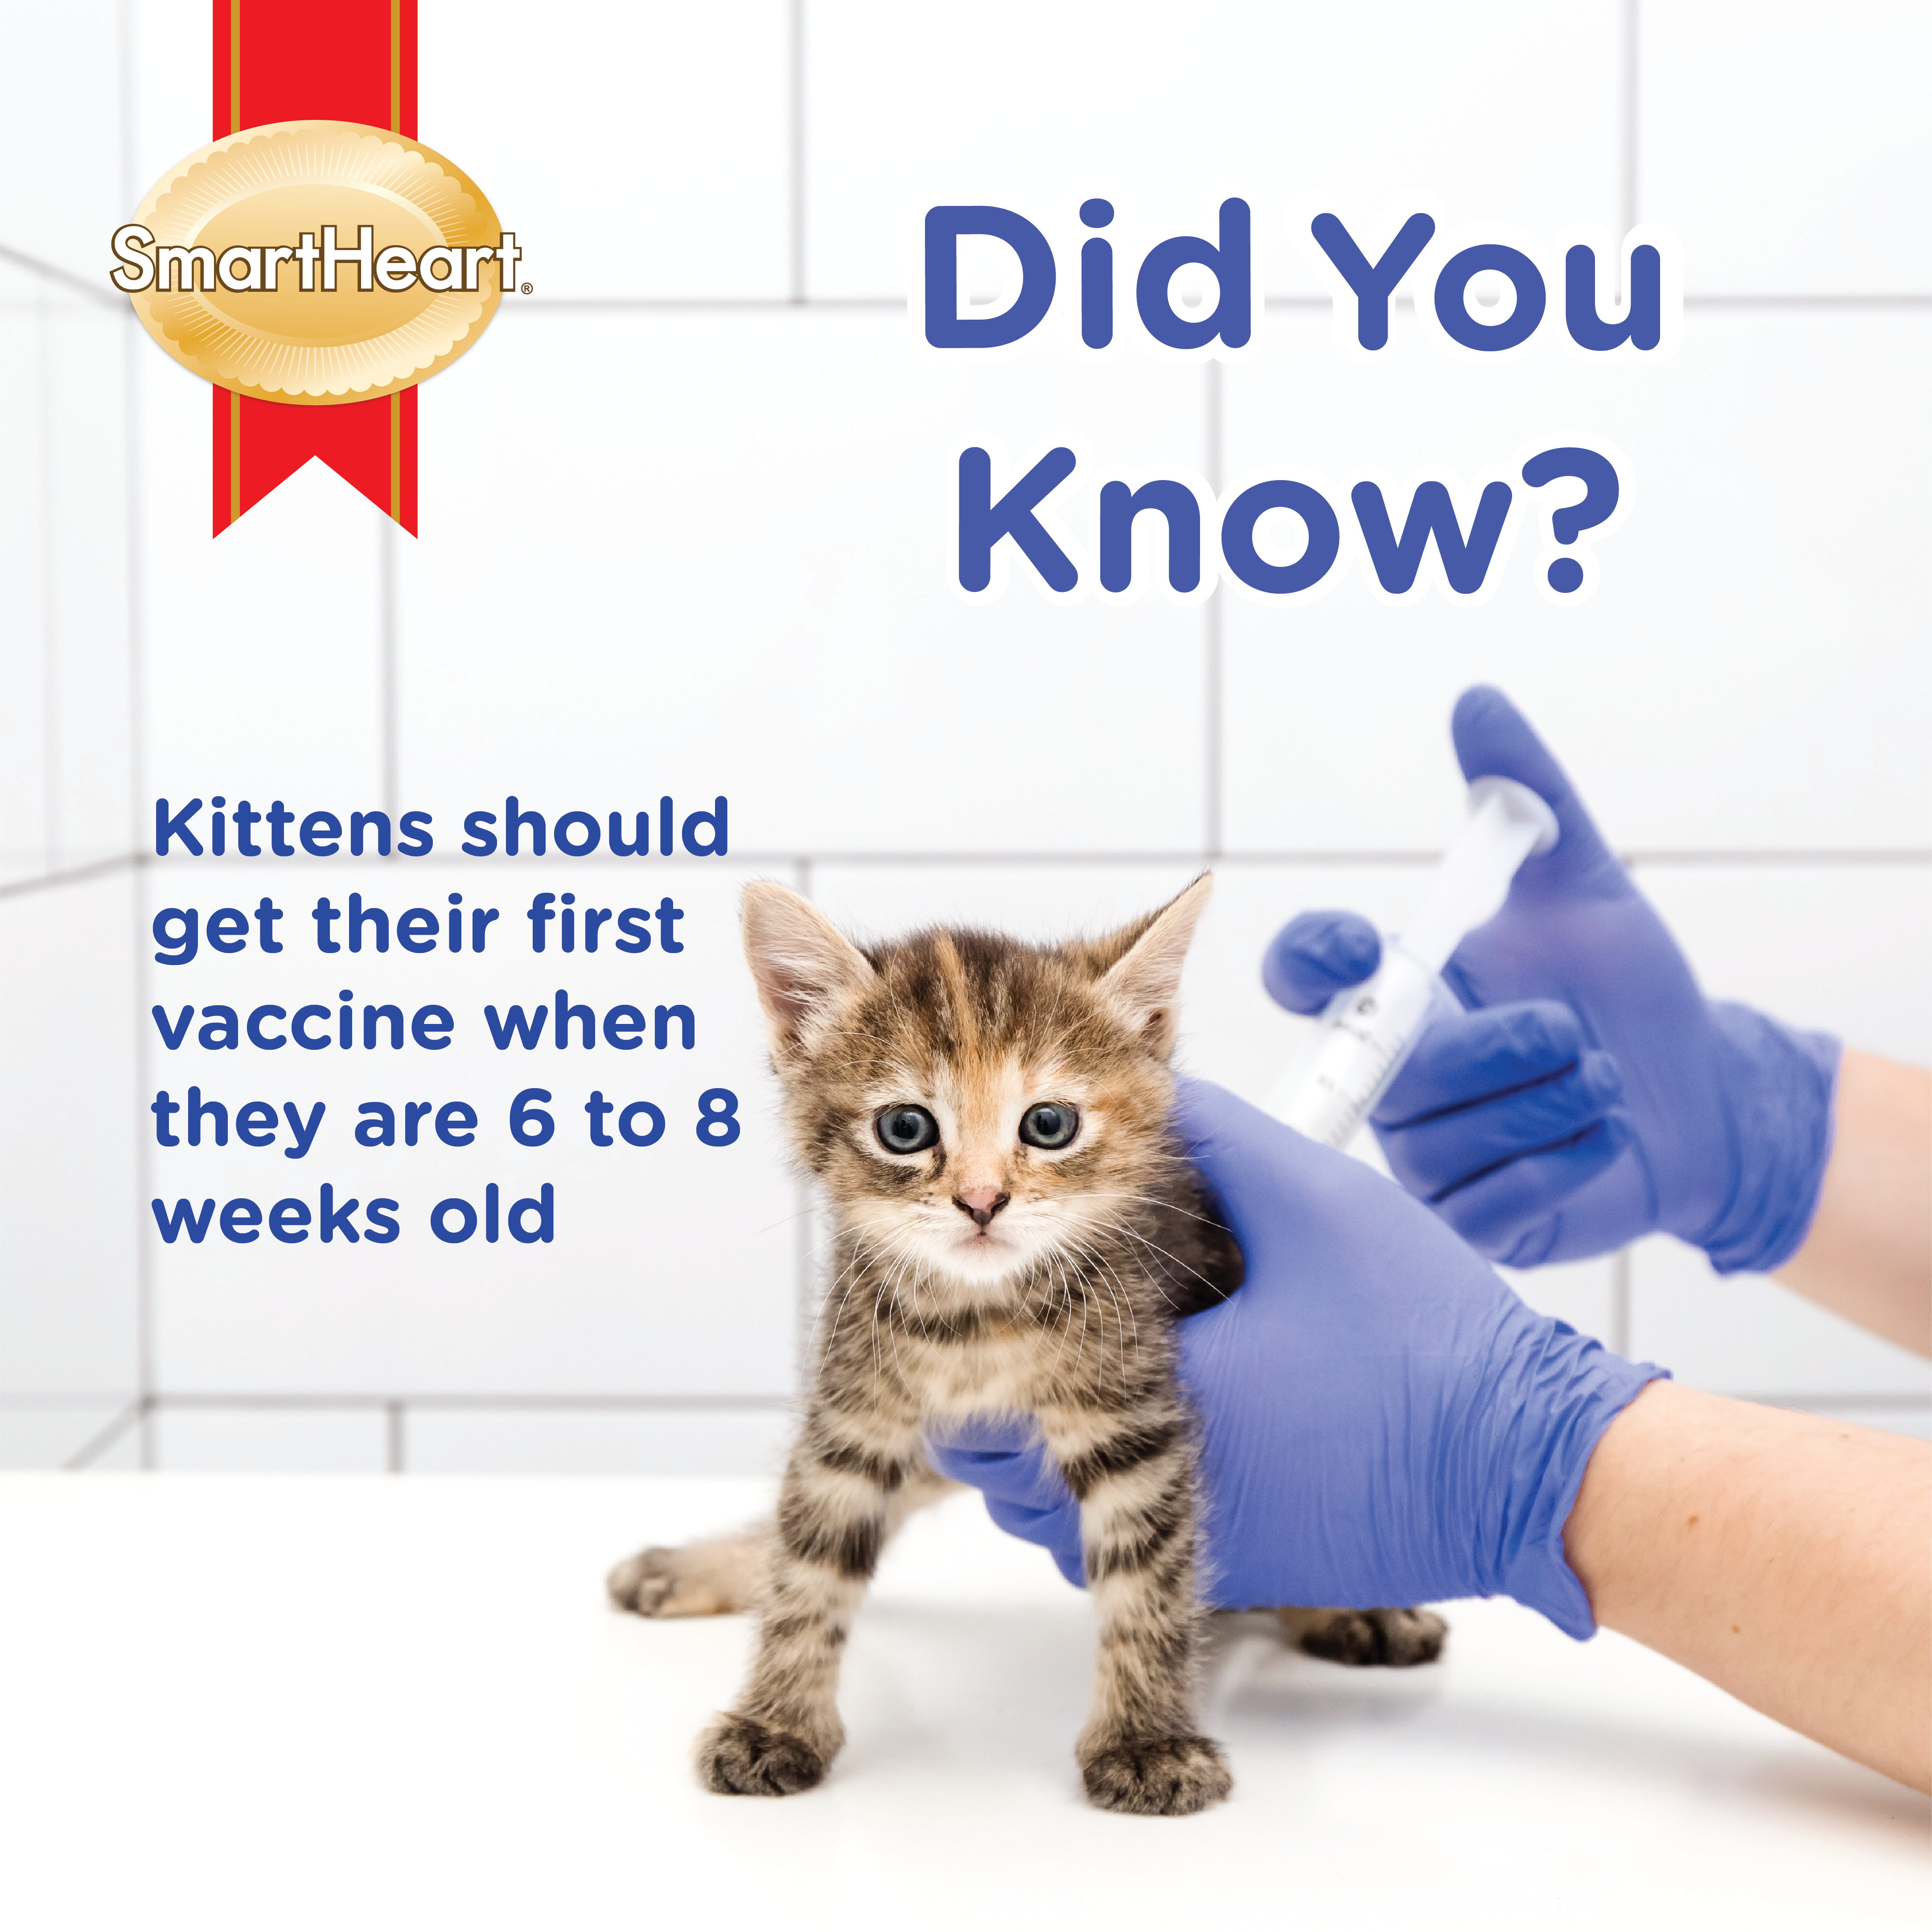 Kittens should get their first vaccine around 6-8 weeks old